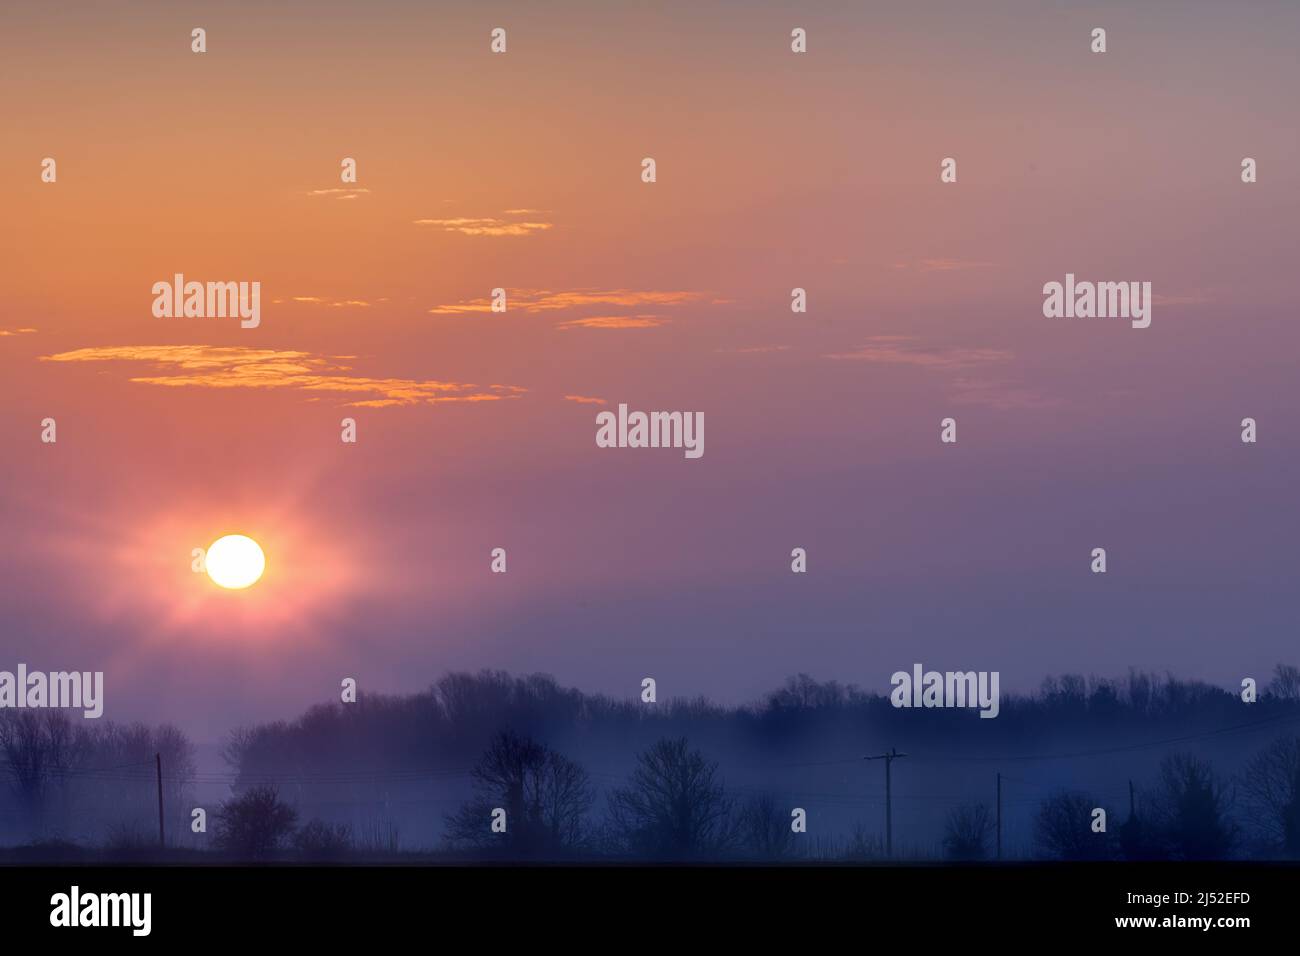 Beautiful sunrise over rural landscape with cold misty trees and orange skies Stock Photo